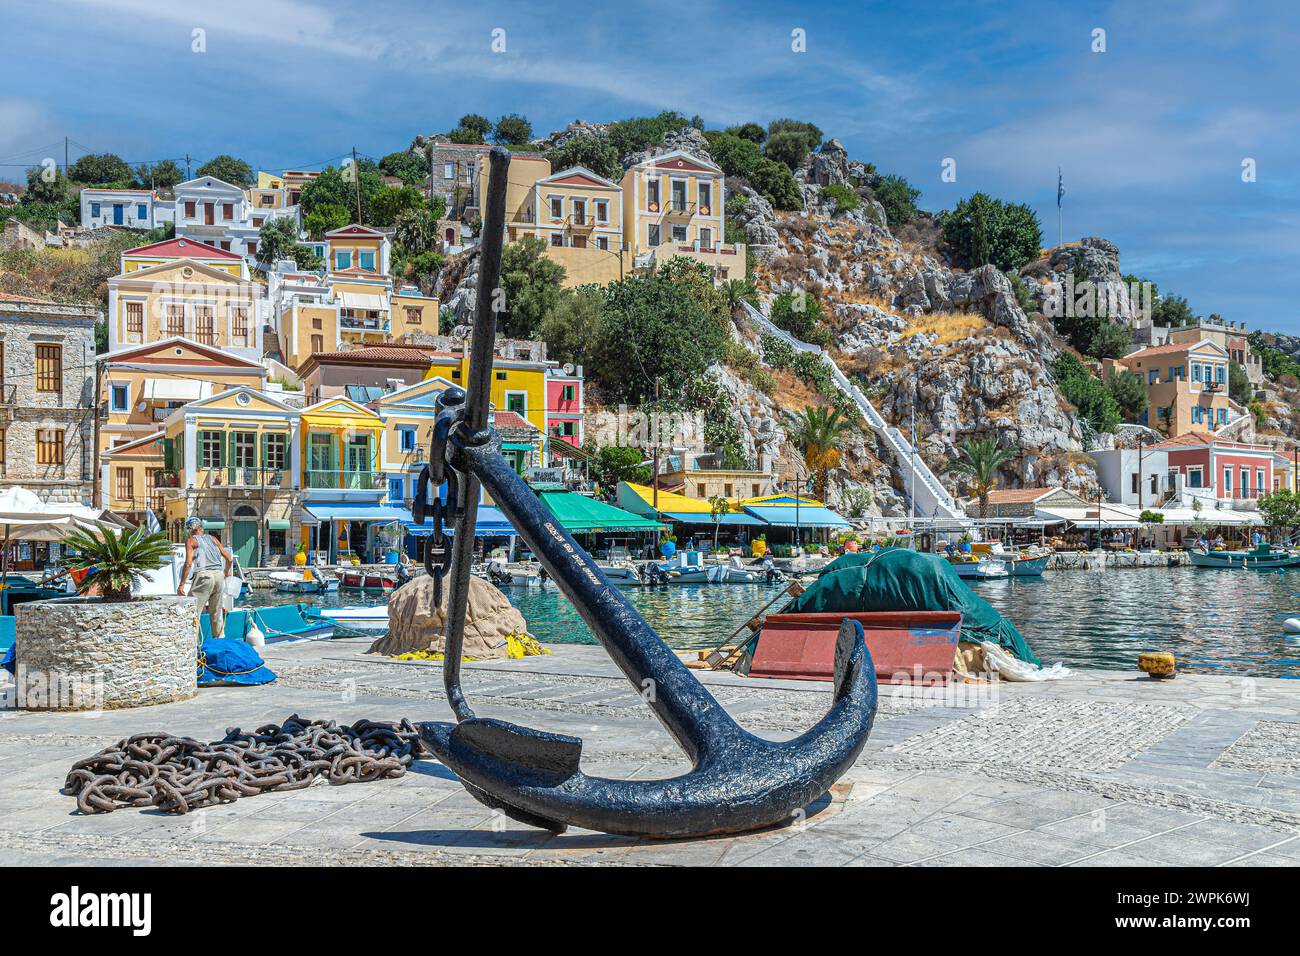 SYMI, GREECE - JULY 3, 2022: Promenade of the city with metal anchor sculpture and multi-colored typical houses. Stock Photo